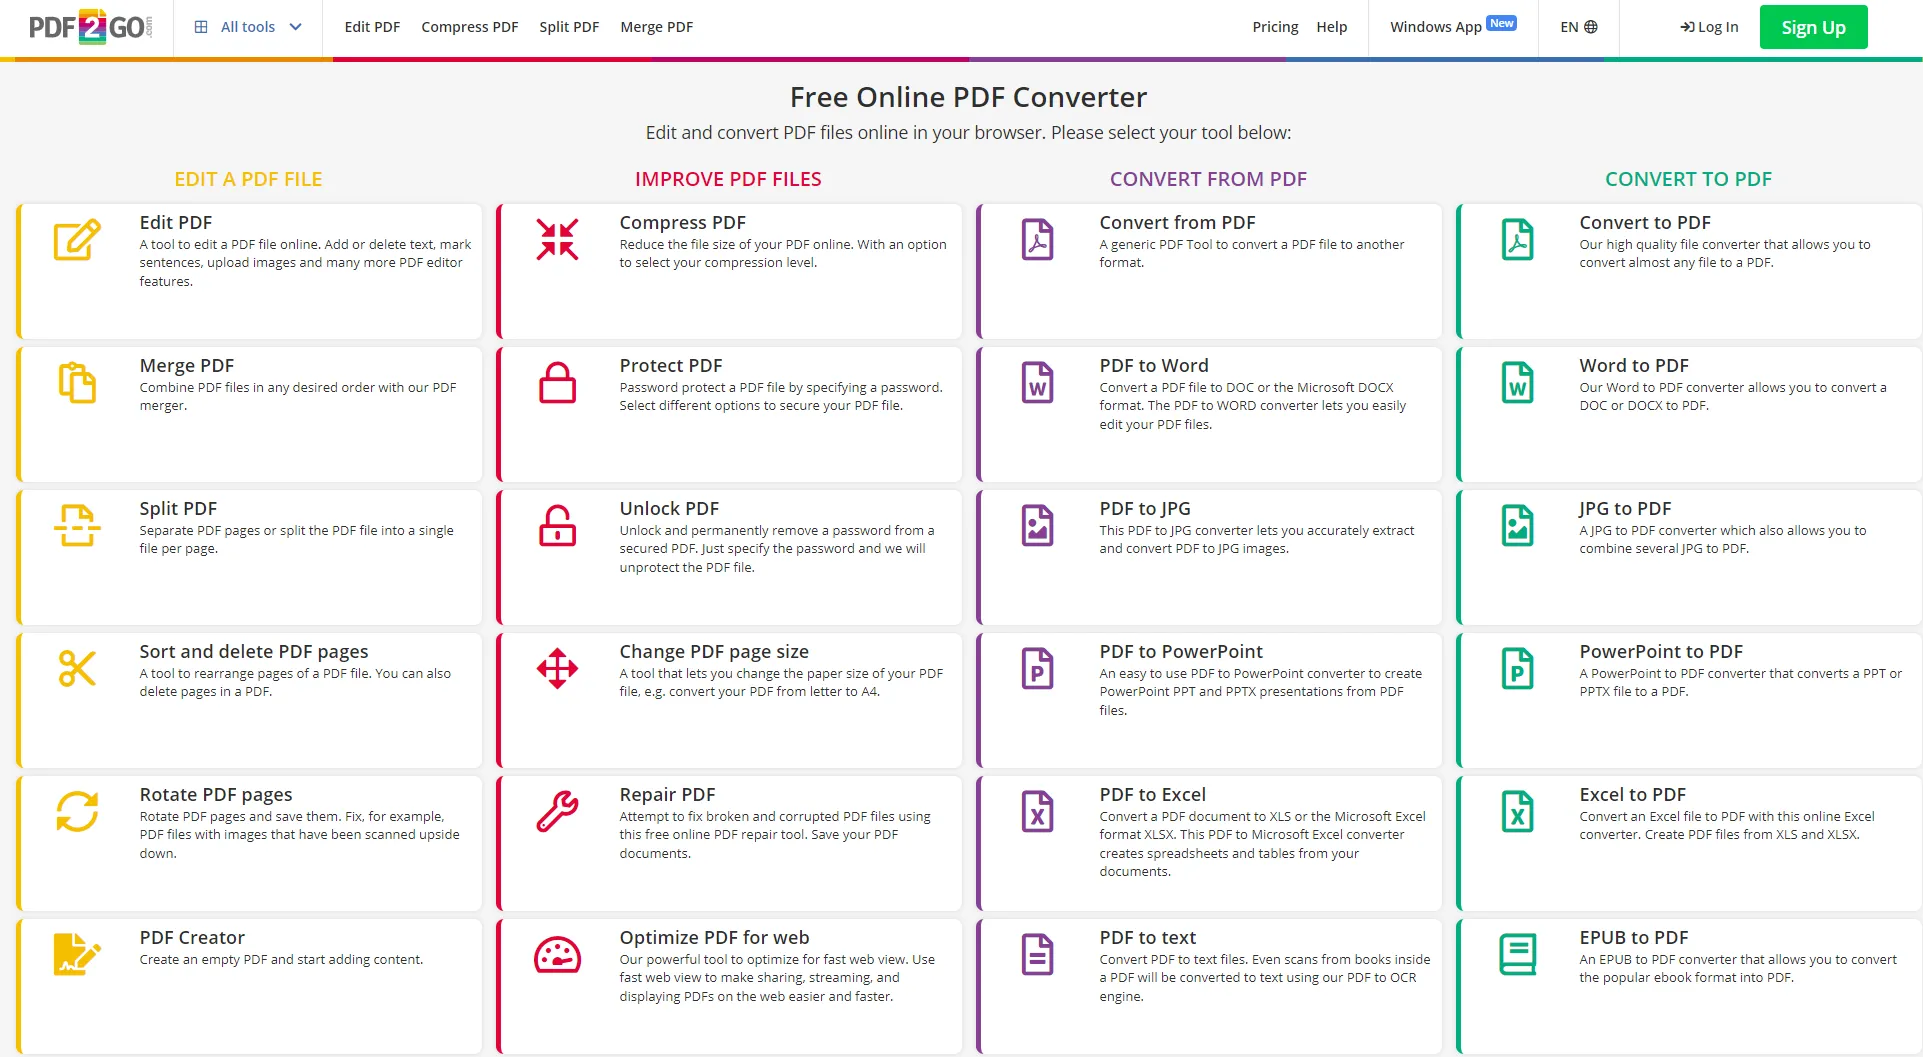 online pdf editor free without watermark pdf2go